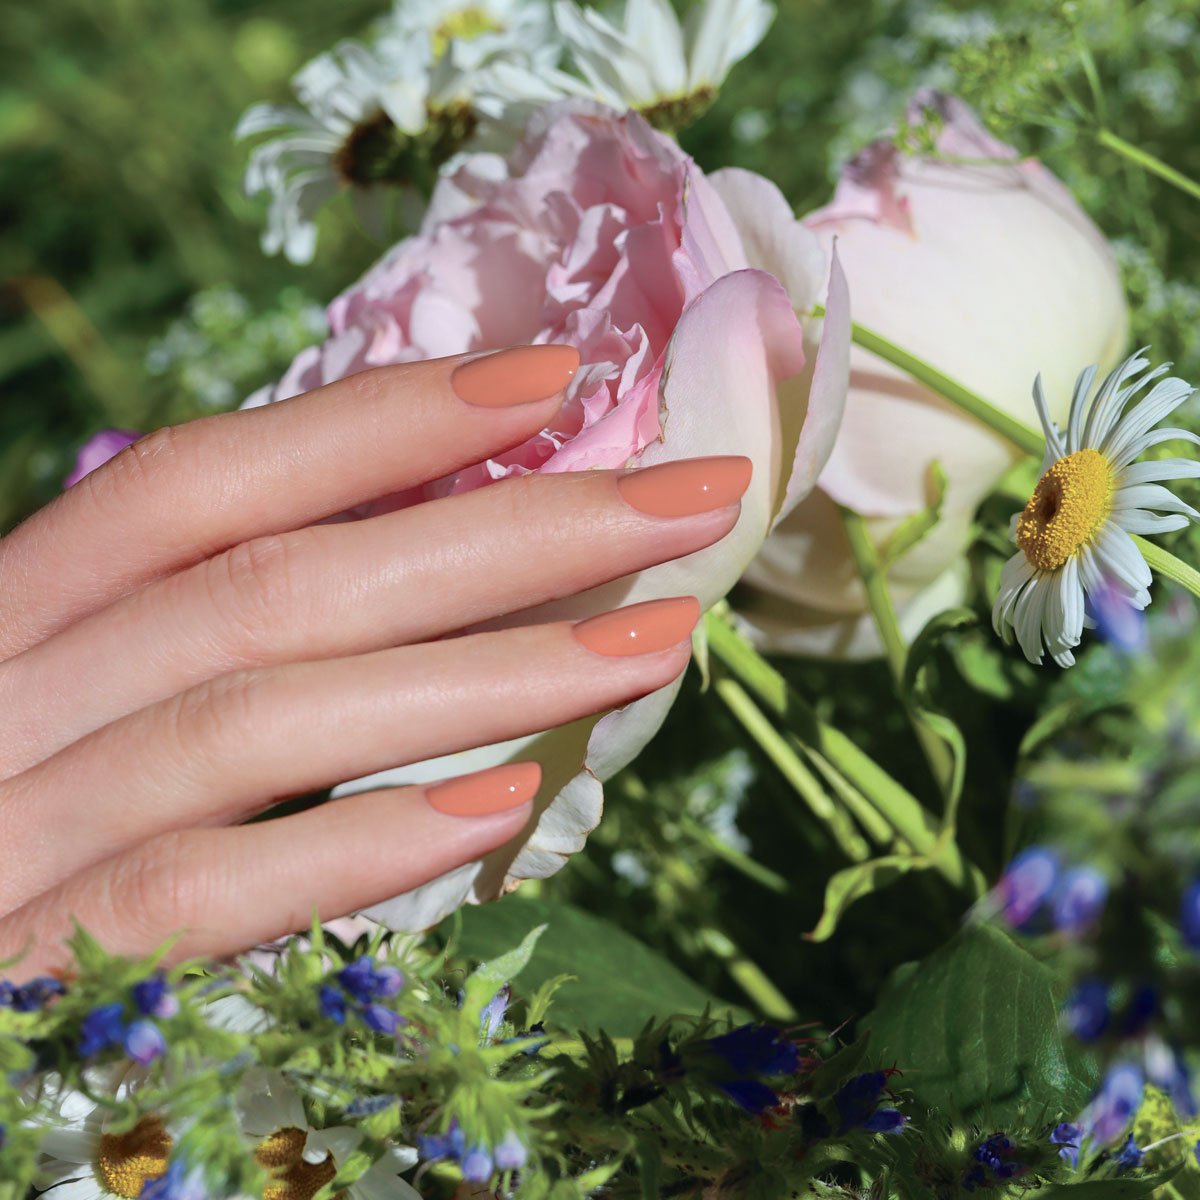 65+ Sweet Peach Nail Designs To Try This Summer | Gel nails, Peach nails,  Peach colored nails